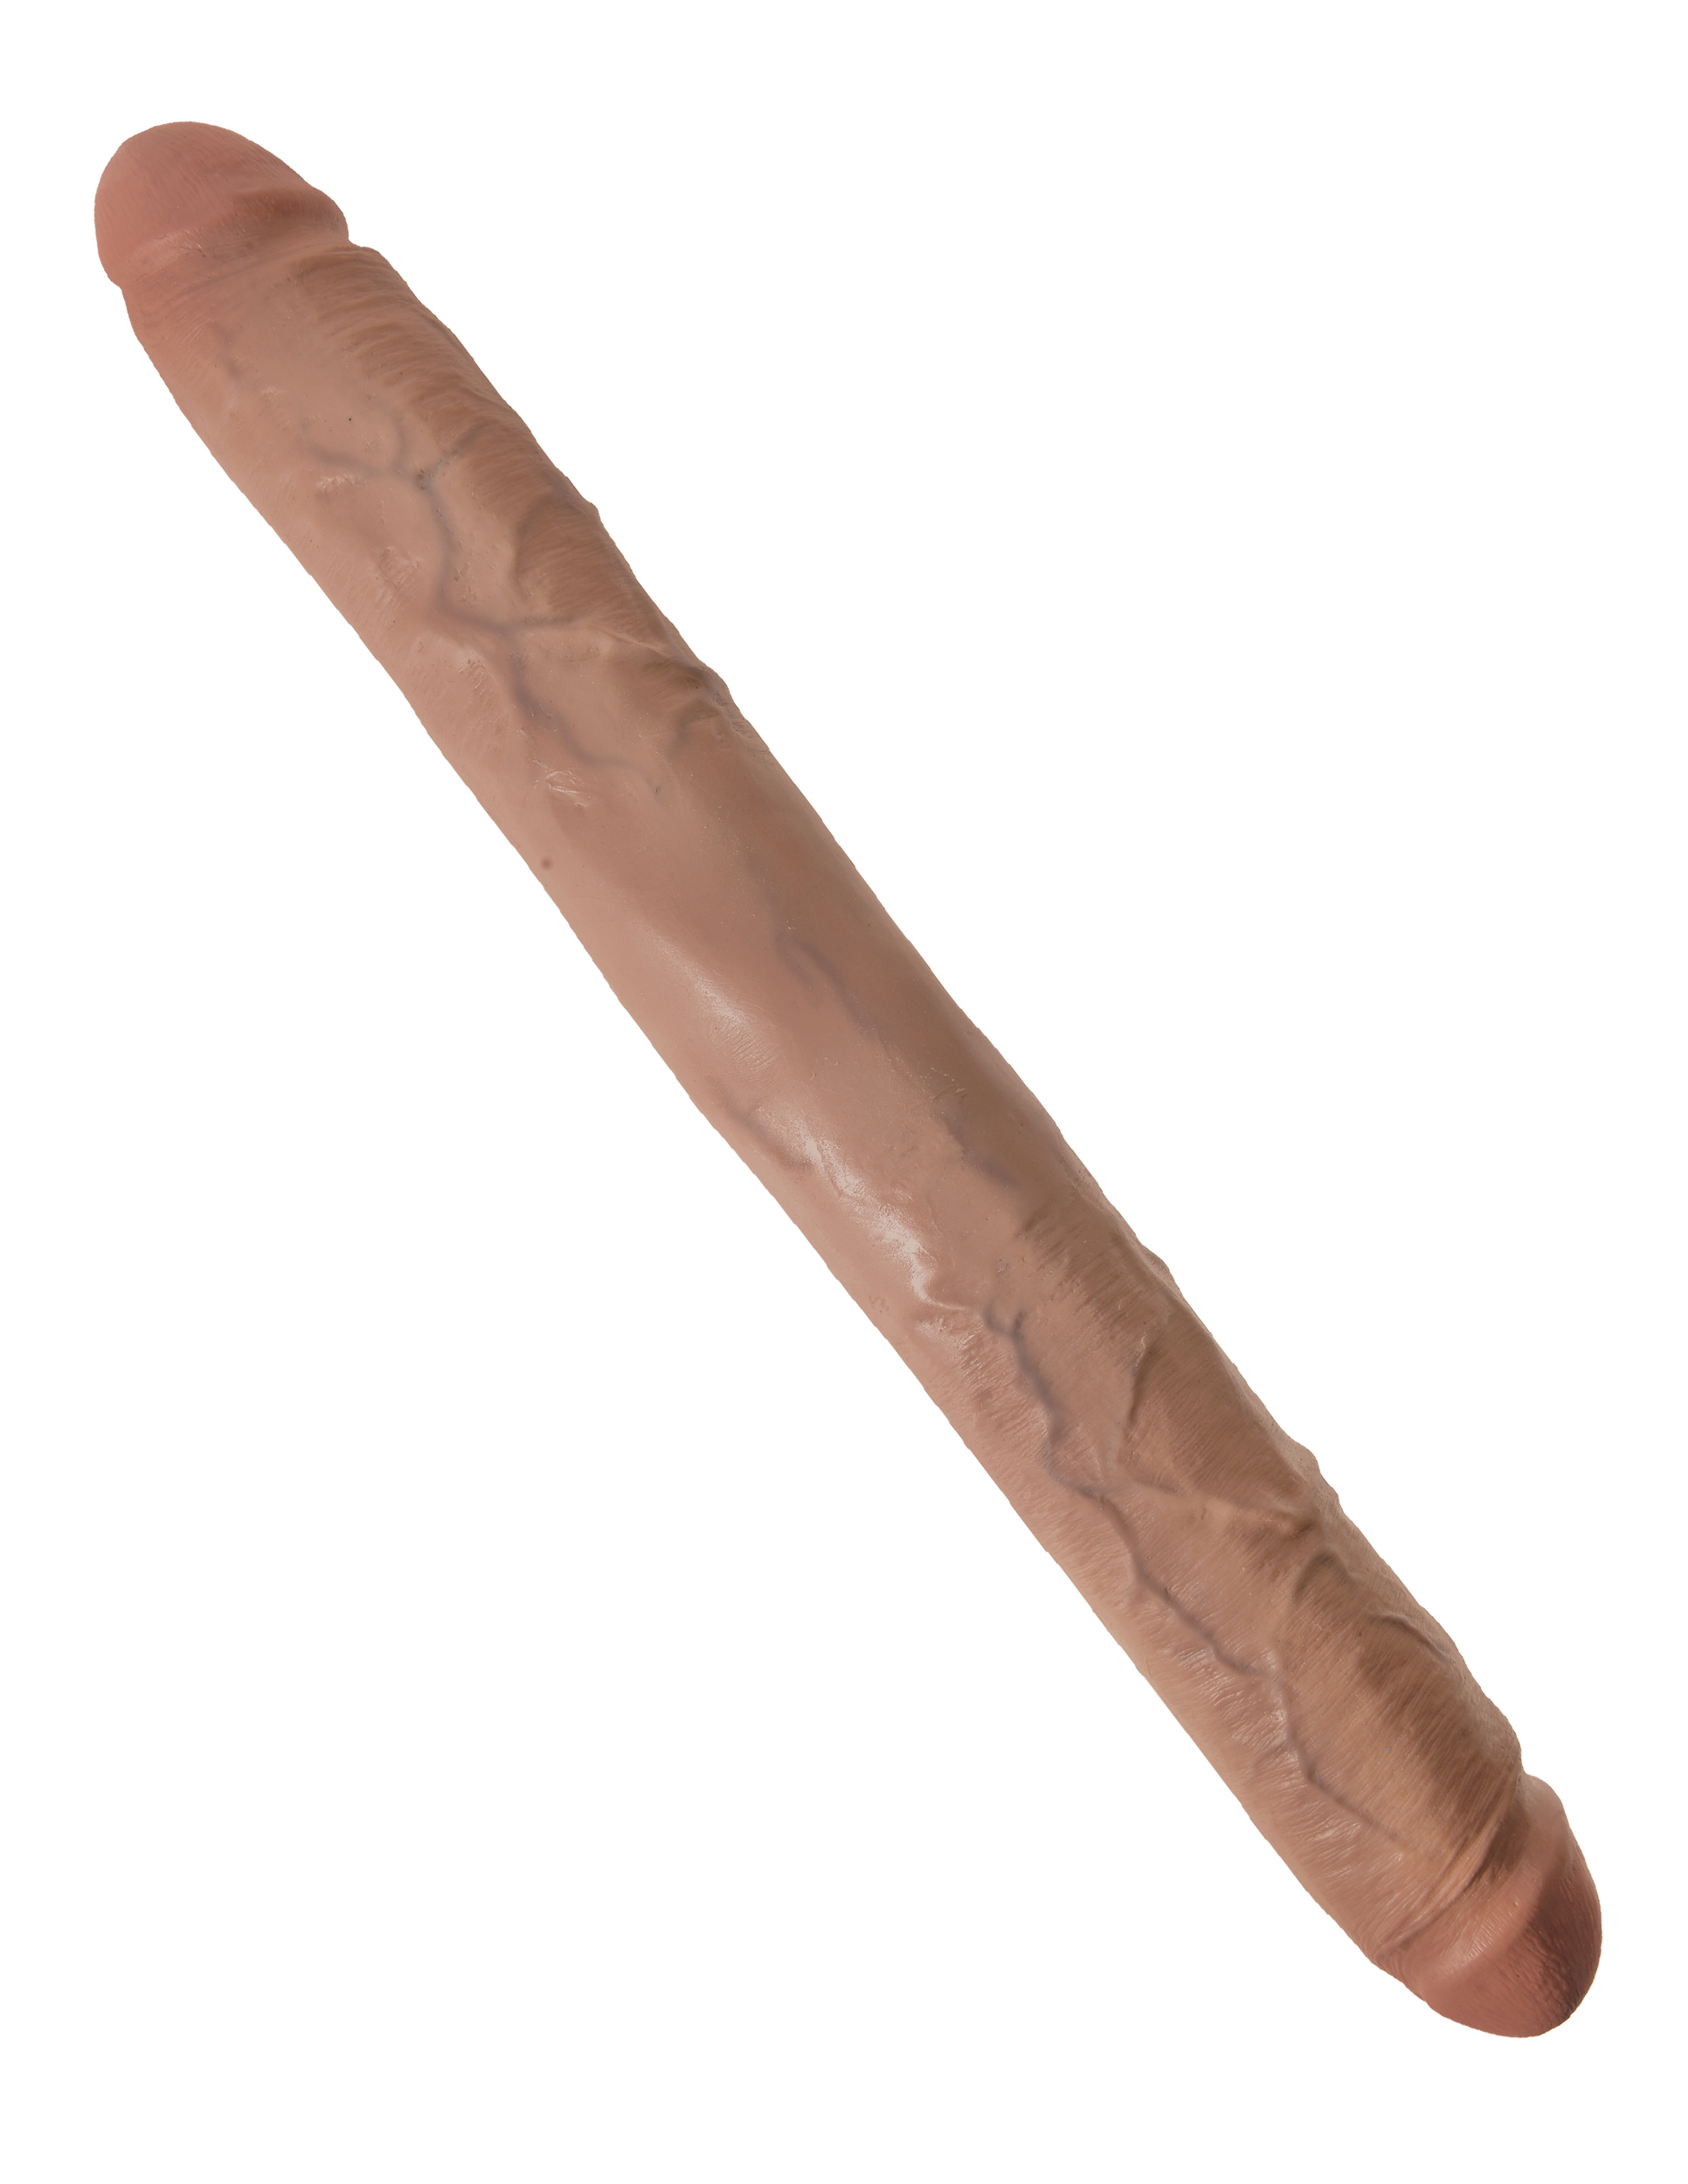 king cock  inch thick double dildo tan 